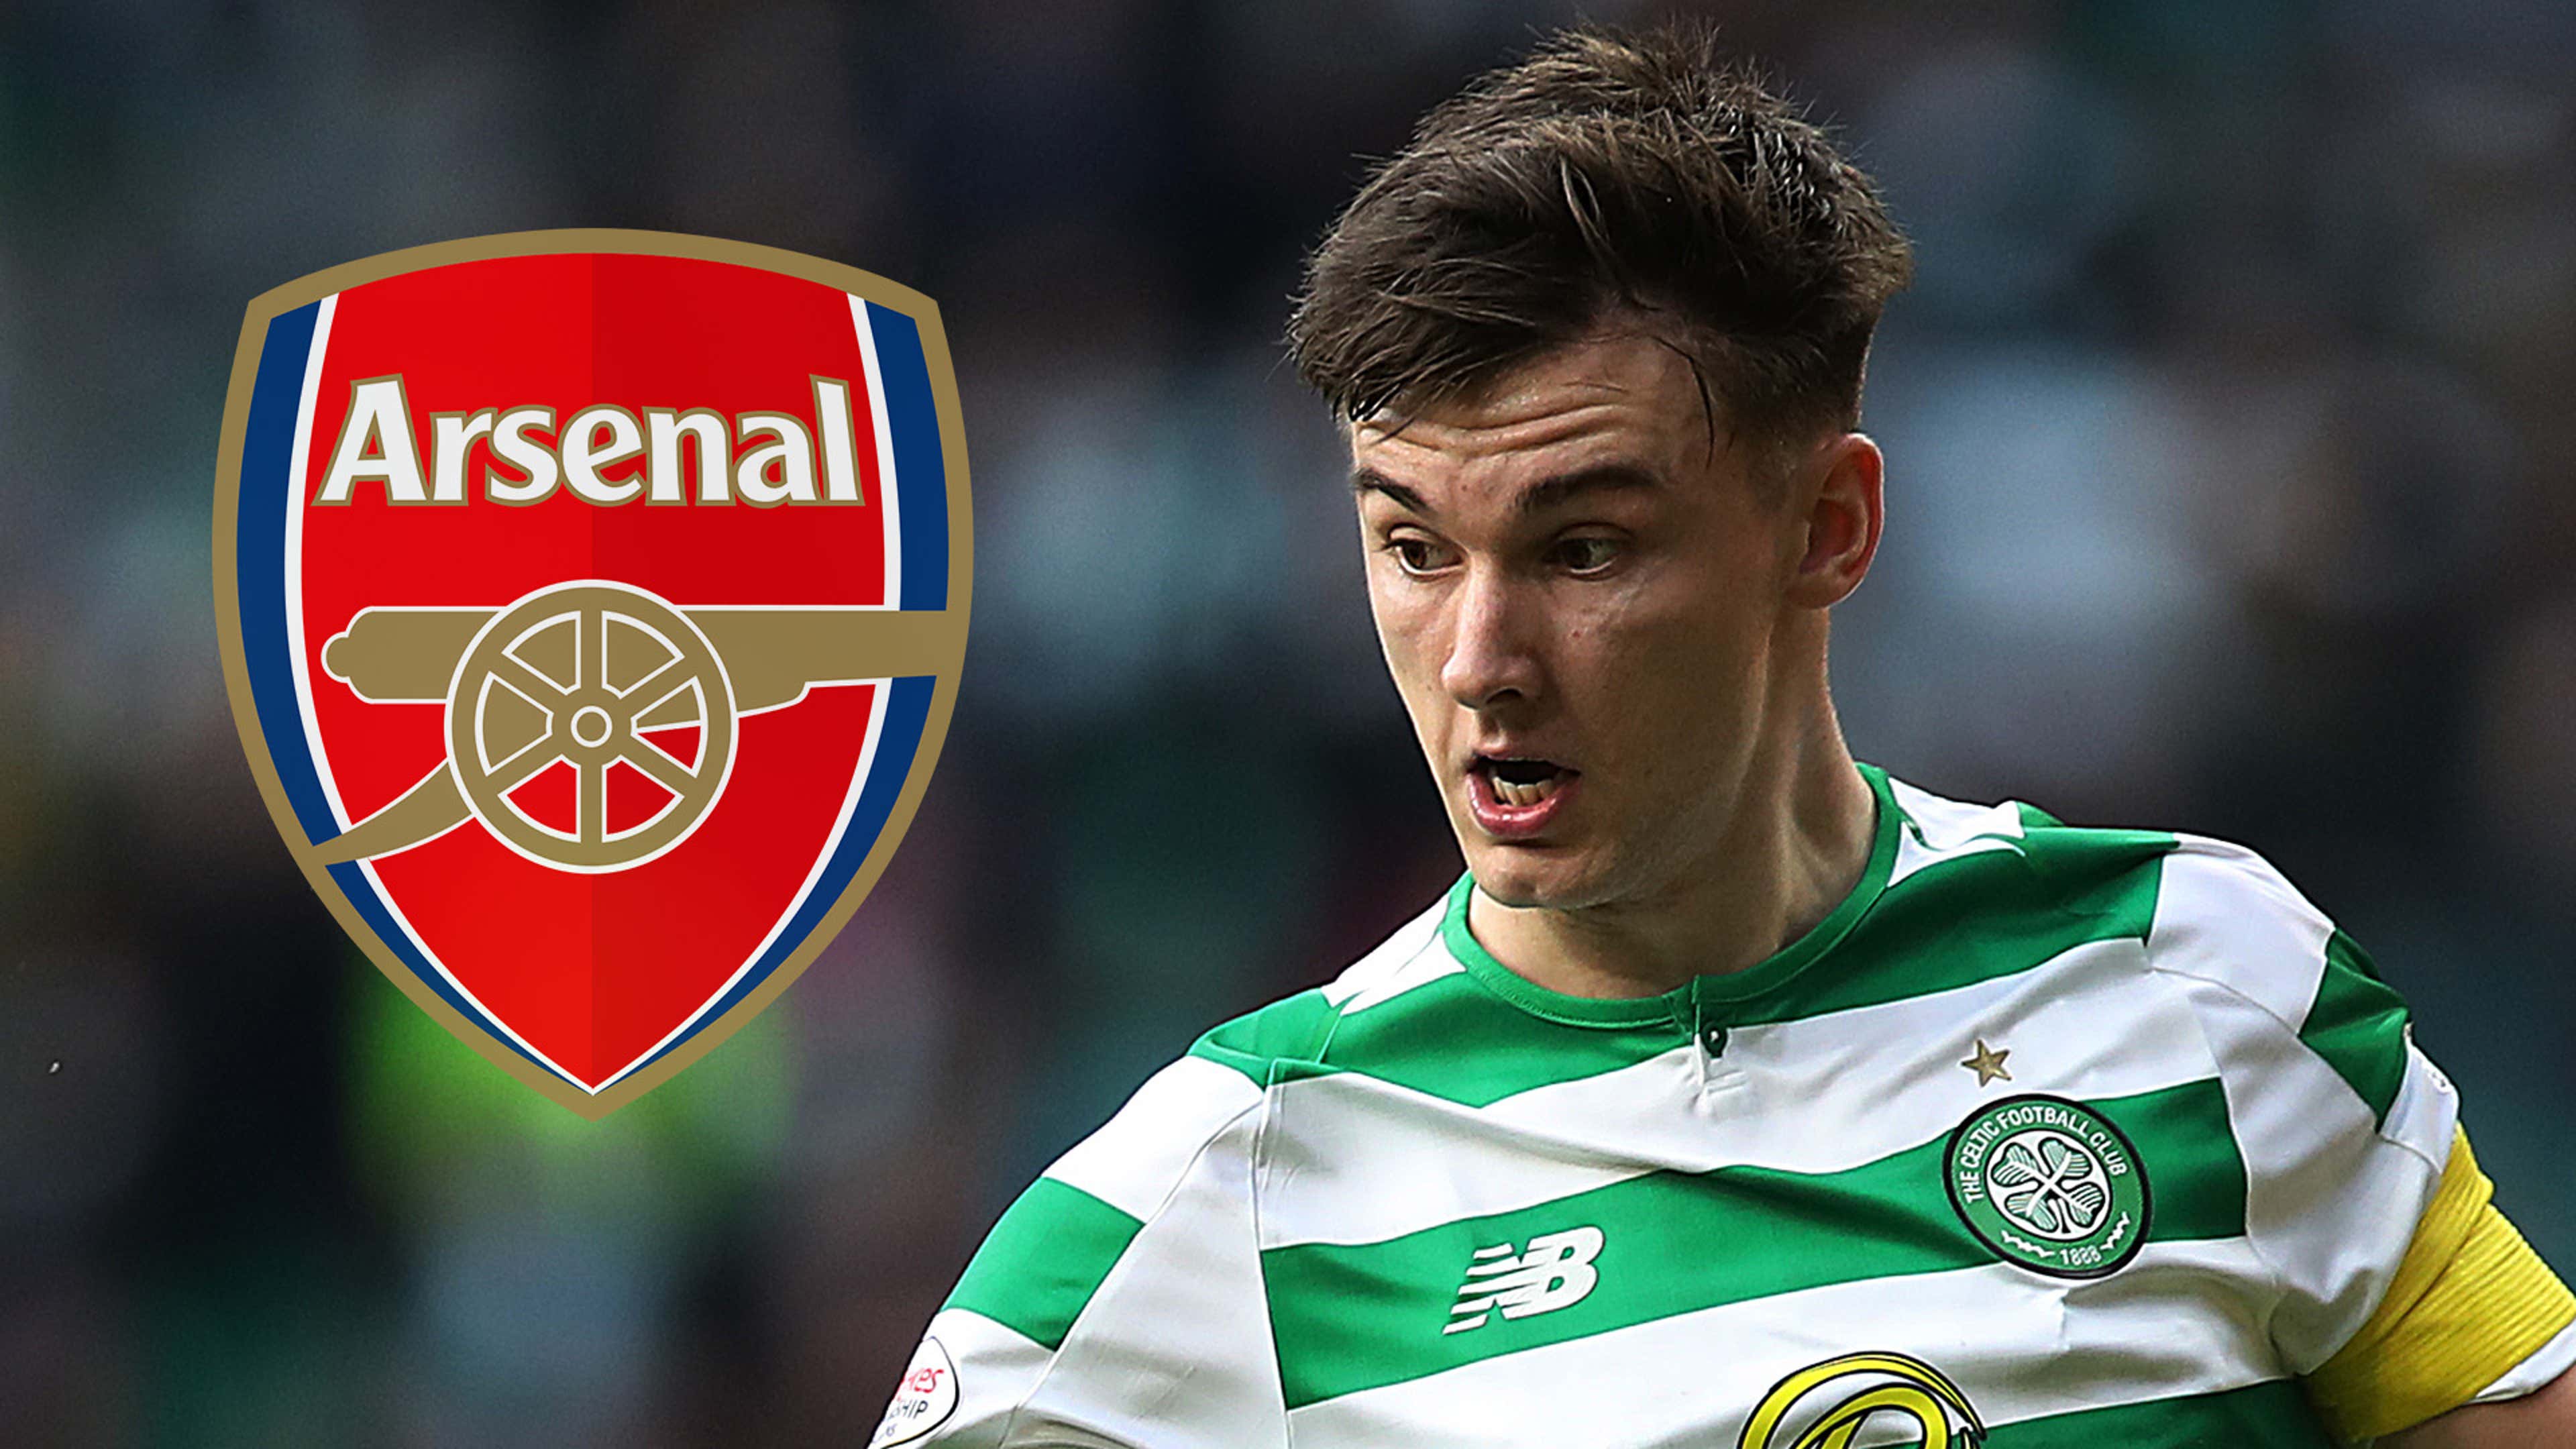 Arsenal trying to commit 'transfer market murder' and Kieran Tierney should  be INSULTED by £15m bid, slams Celtic legend Chris Sutton